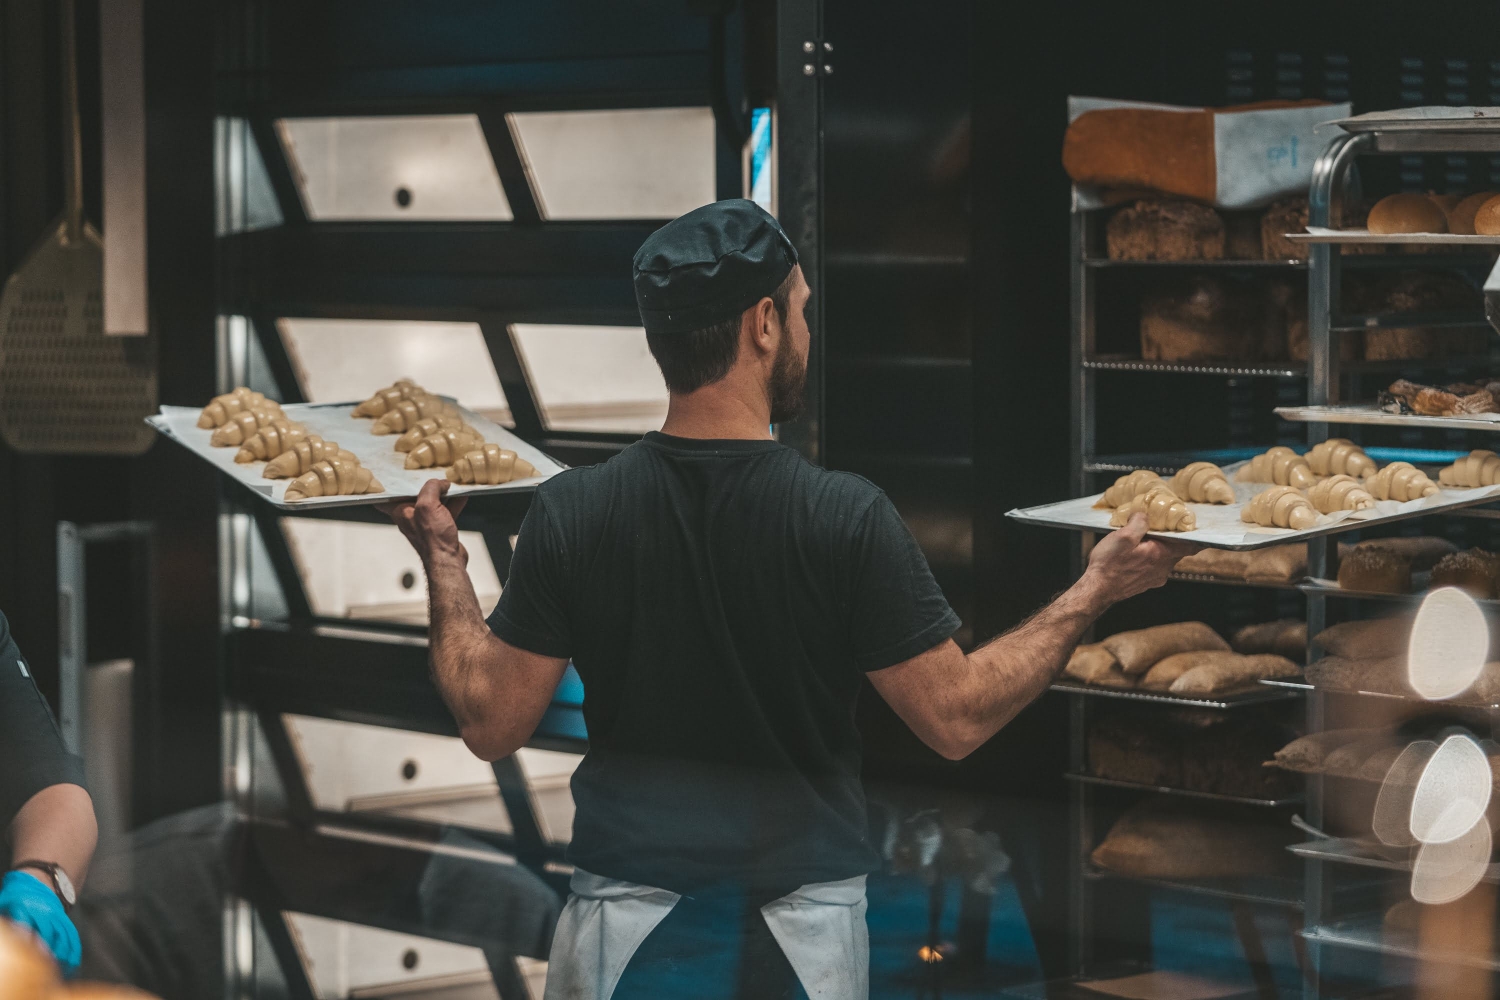 Baker working with baked goods